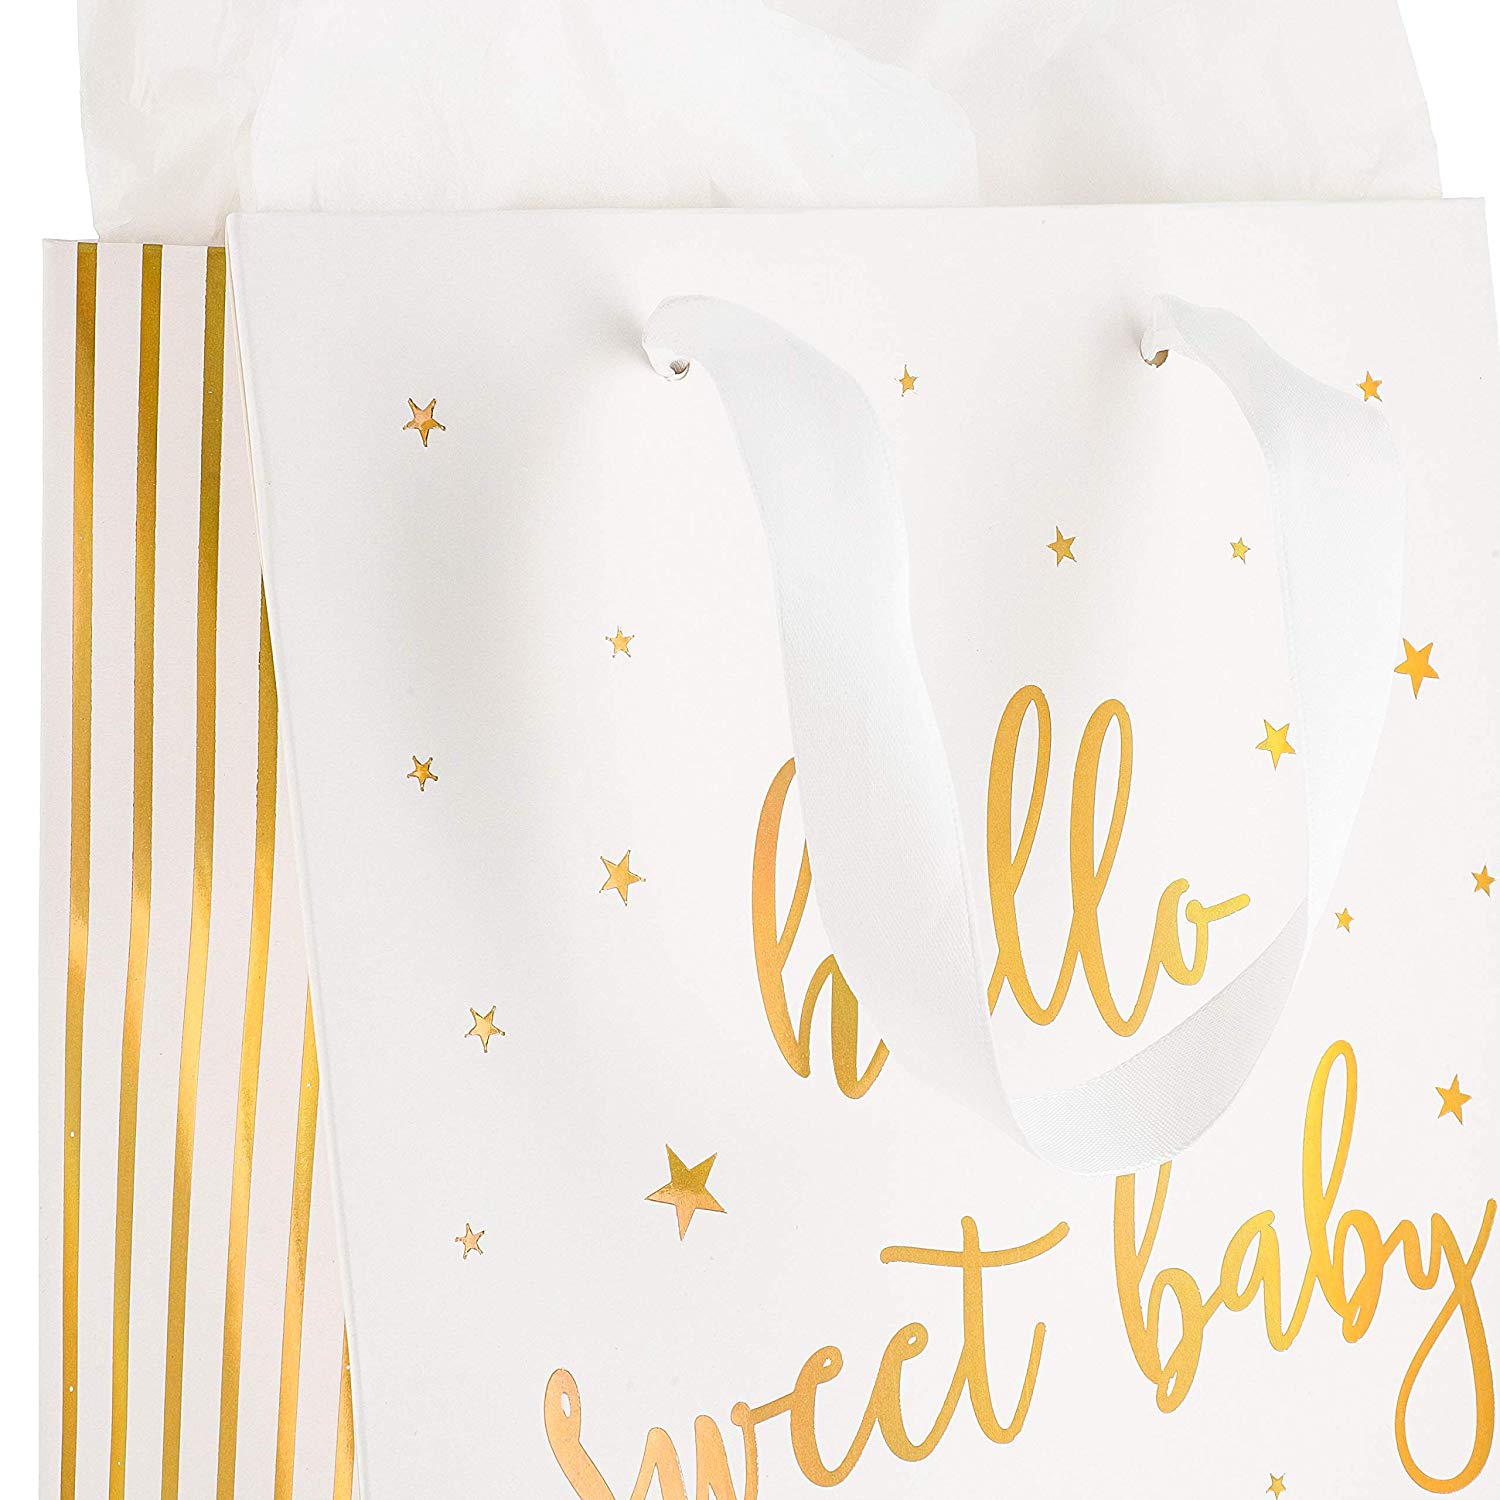 12Pcs Paper Candy Bag Baby Shower Gift Box Dessert Boys Girls Baby Baptism  Birthday Gifts Party Decoration